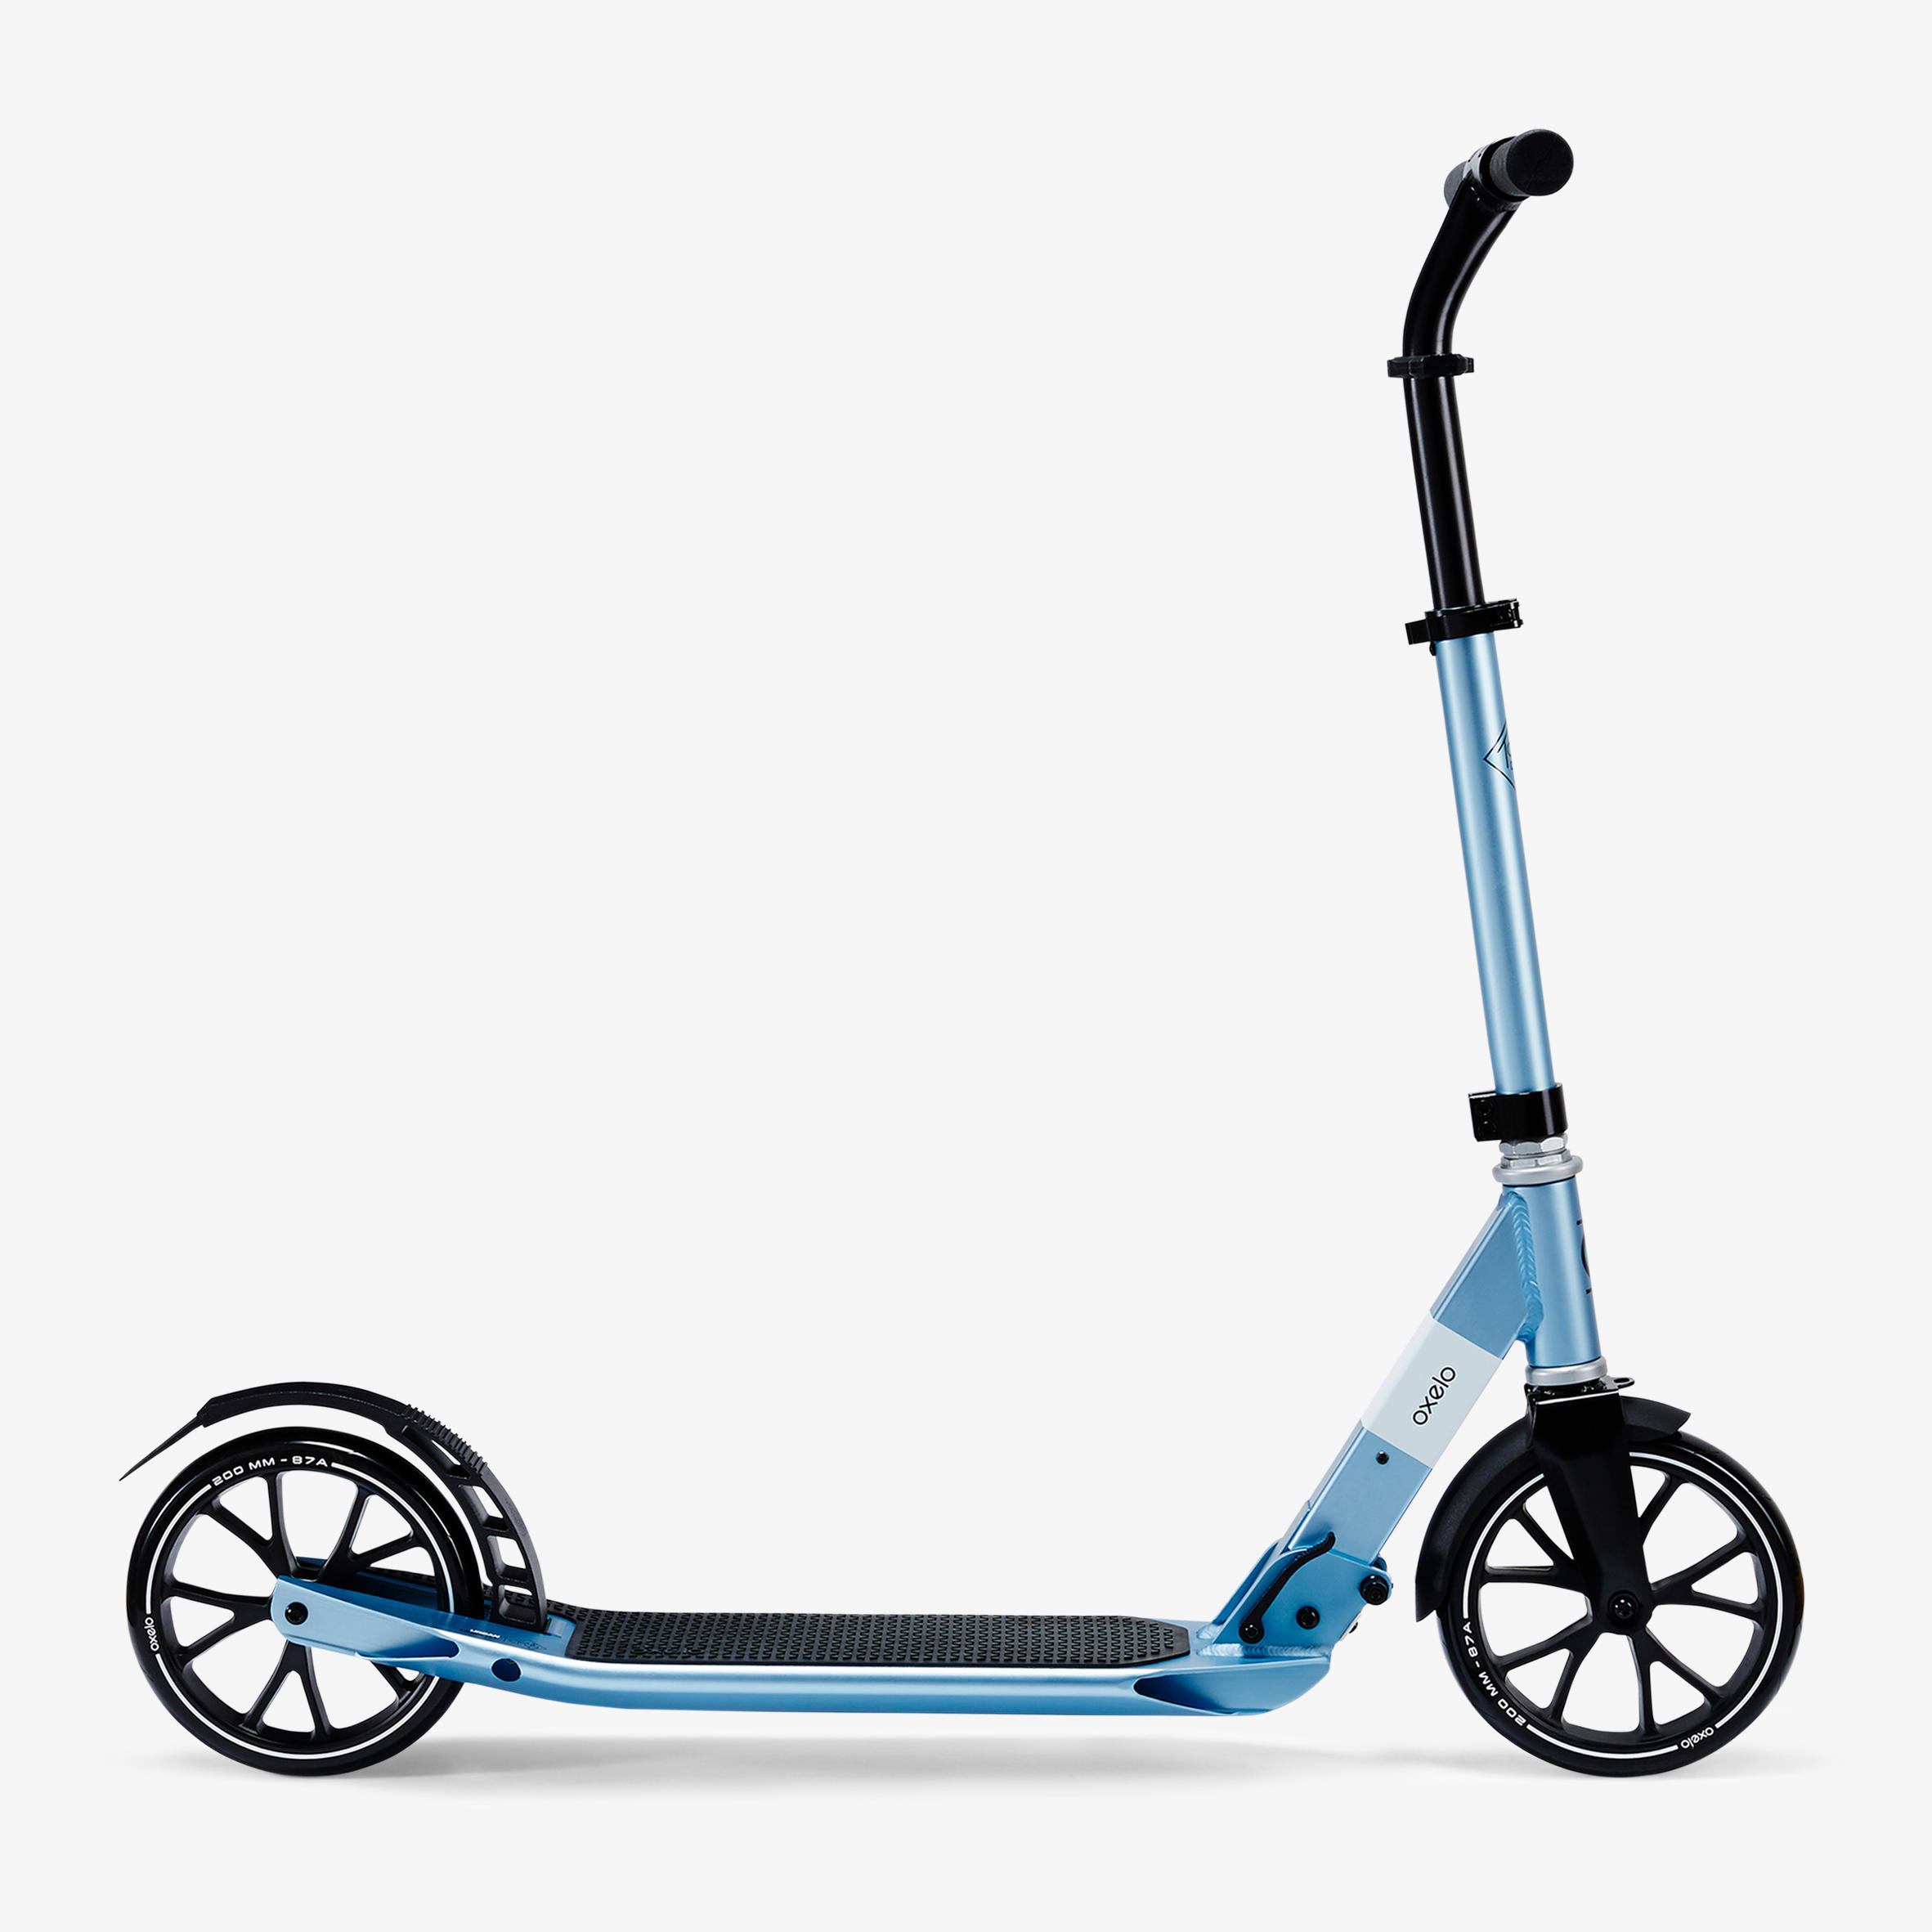 Town 5 XL Adult Scooter - Blue - Decathlon